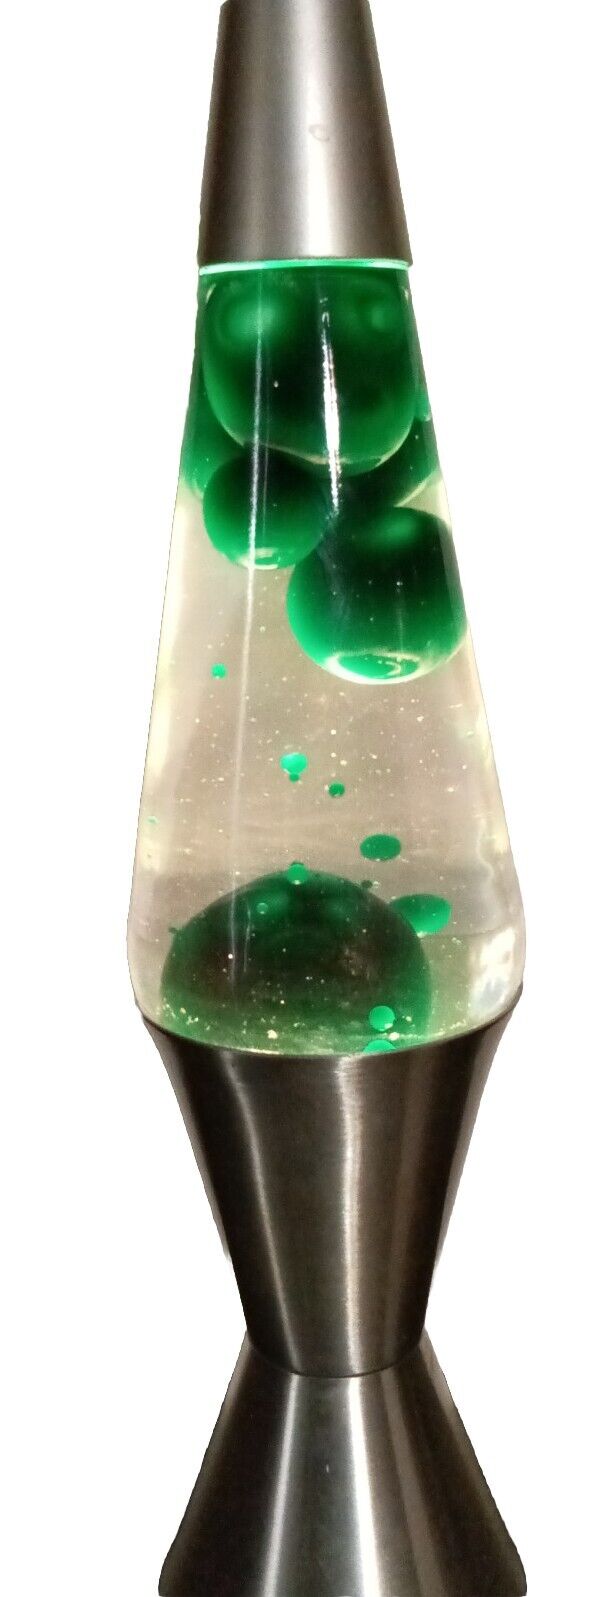 Vintage 90s Lava Lamp - Silver Base Lime Green Lava, Clear Liquid - Works Great